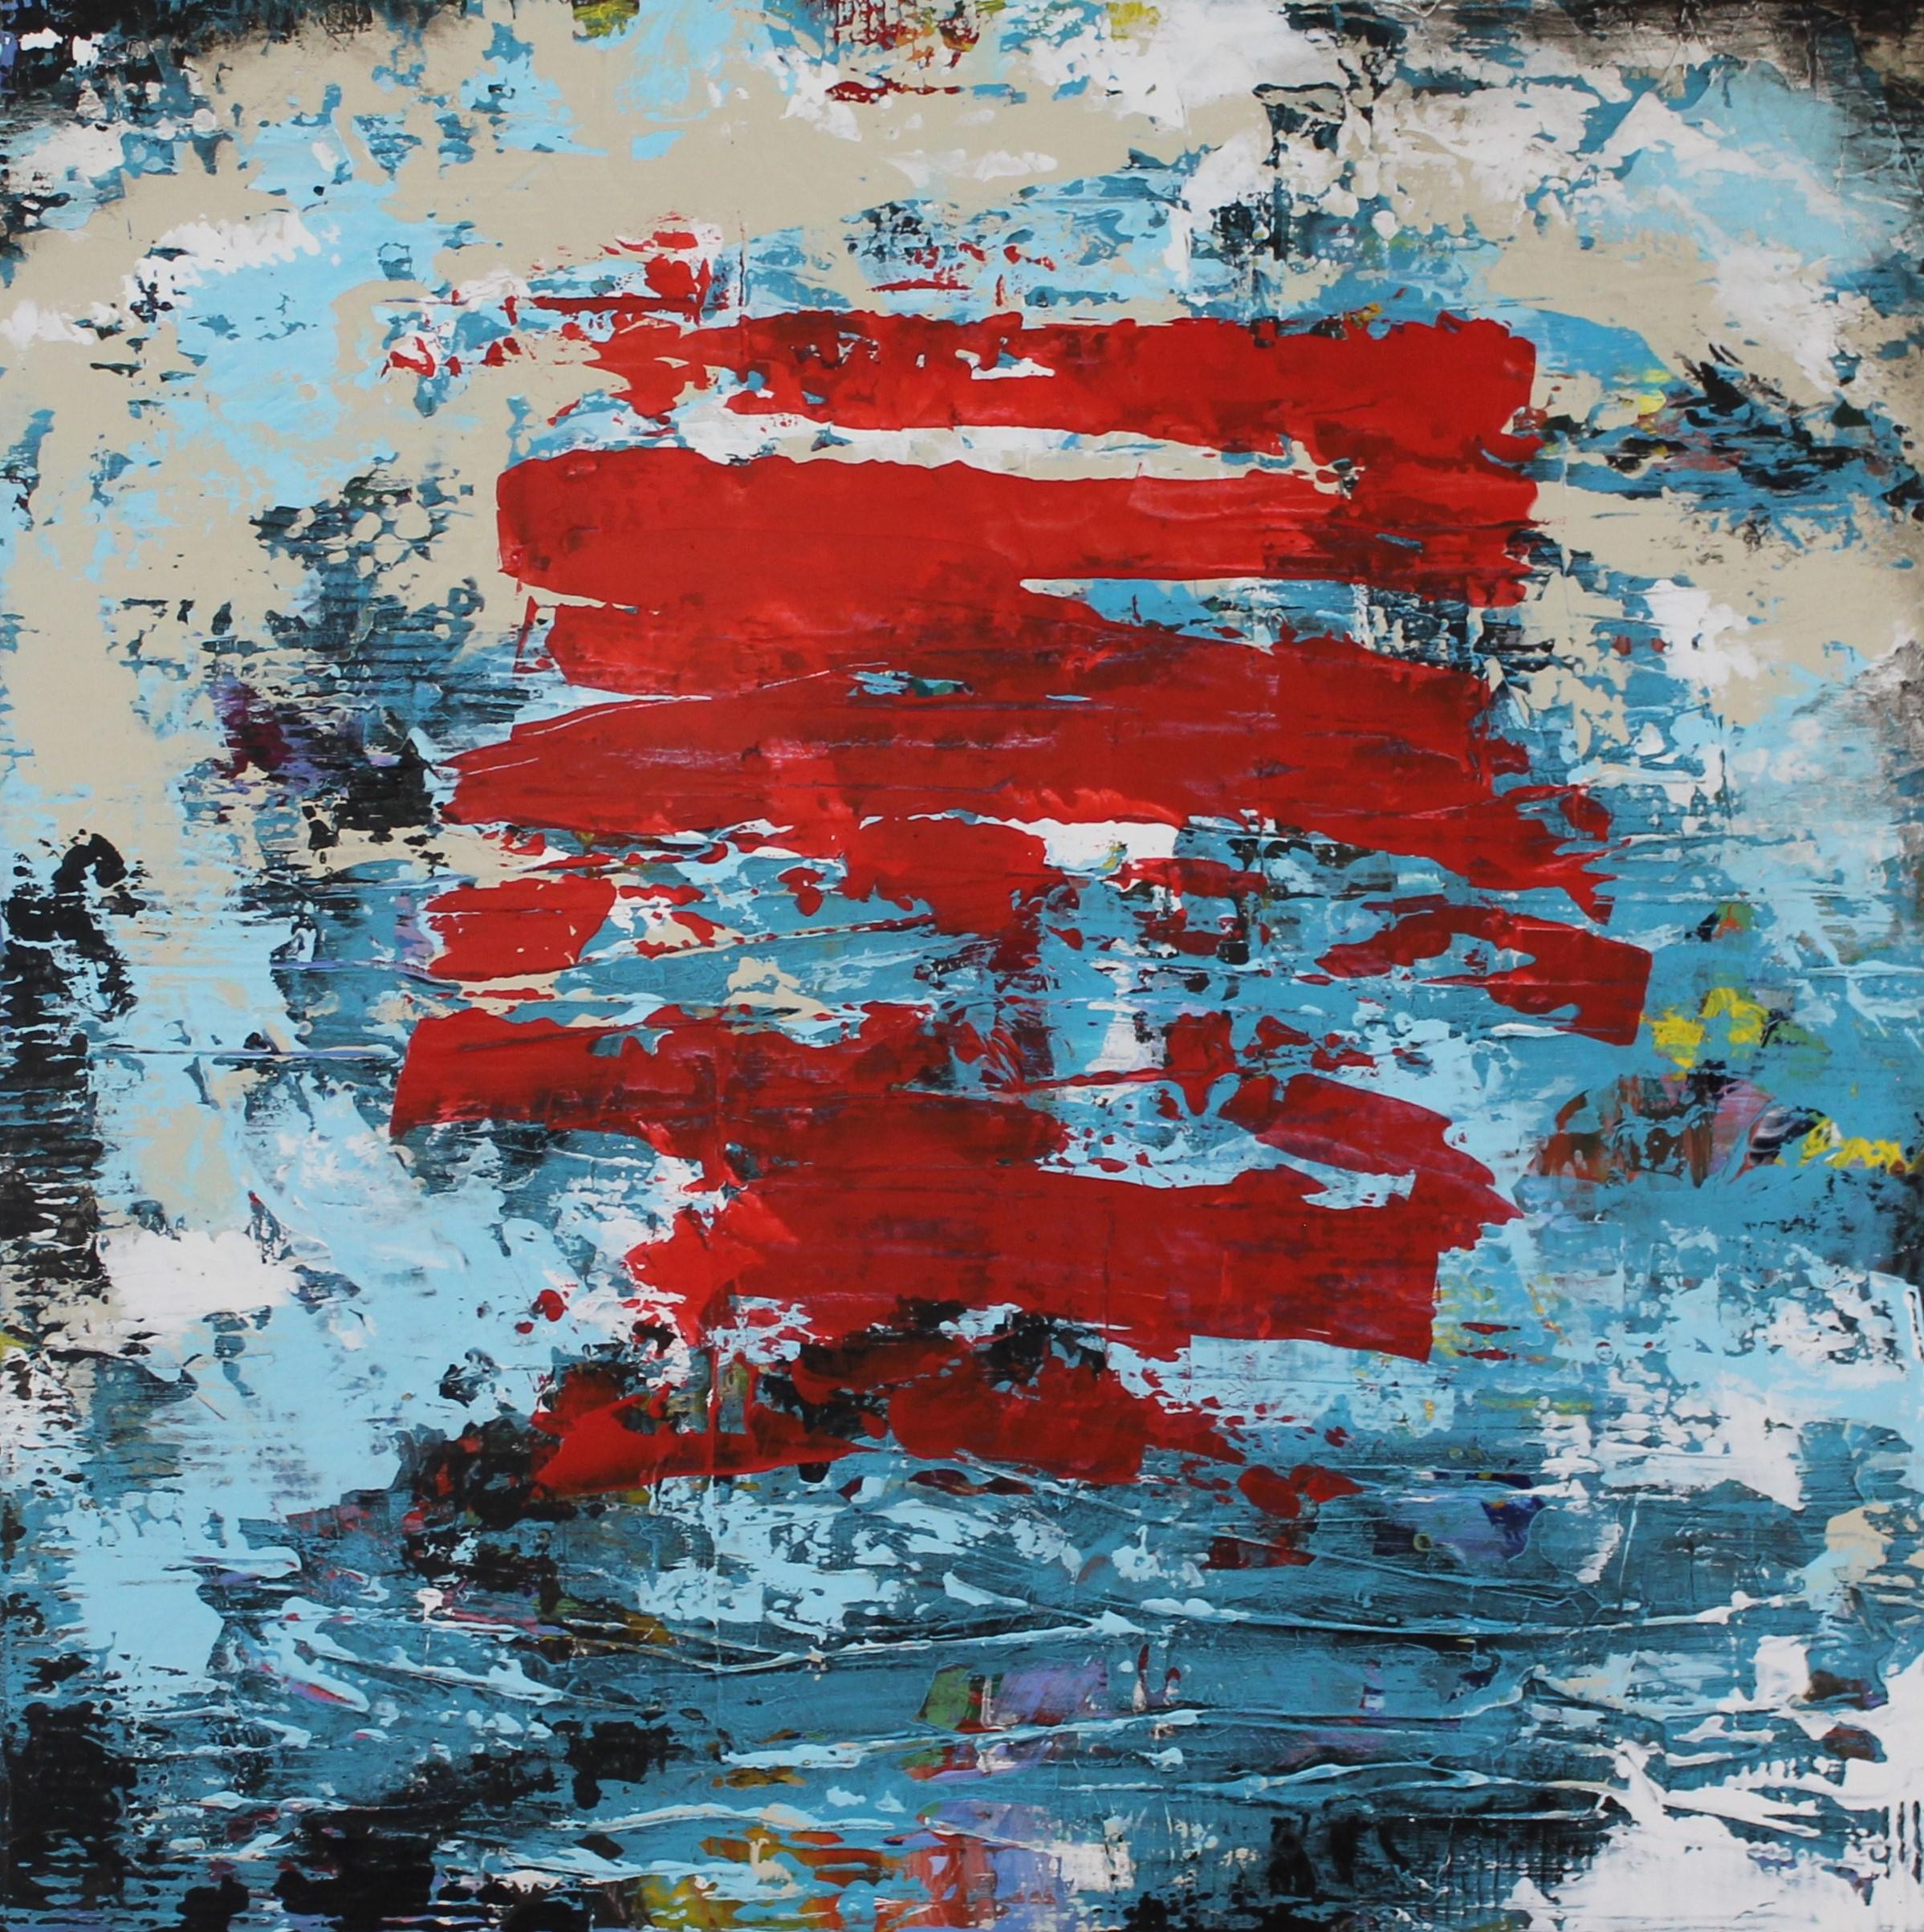 <p>Artist Comments<br>Artist Gary J. Noland Jr. exhibits an eye-catching abstract as an expression of feeling. The dynamic red paintwork drives the viewer's attention to the center and encourages an exploration of the cerulean background. Gary